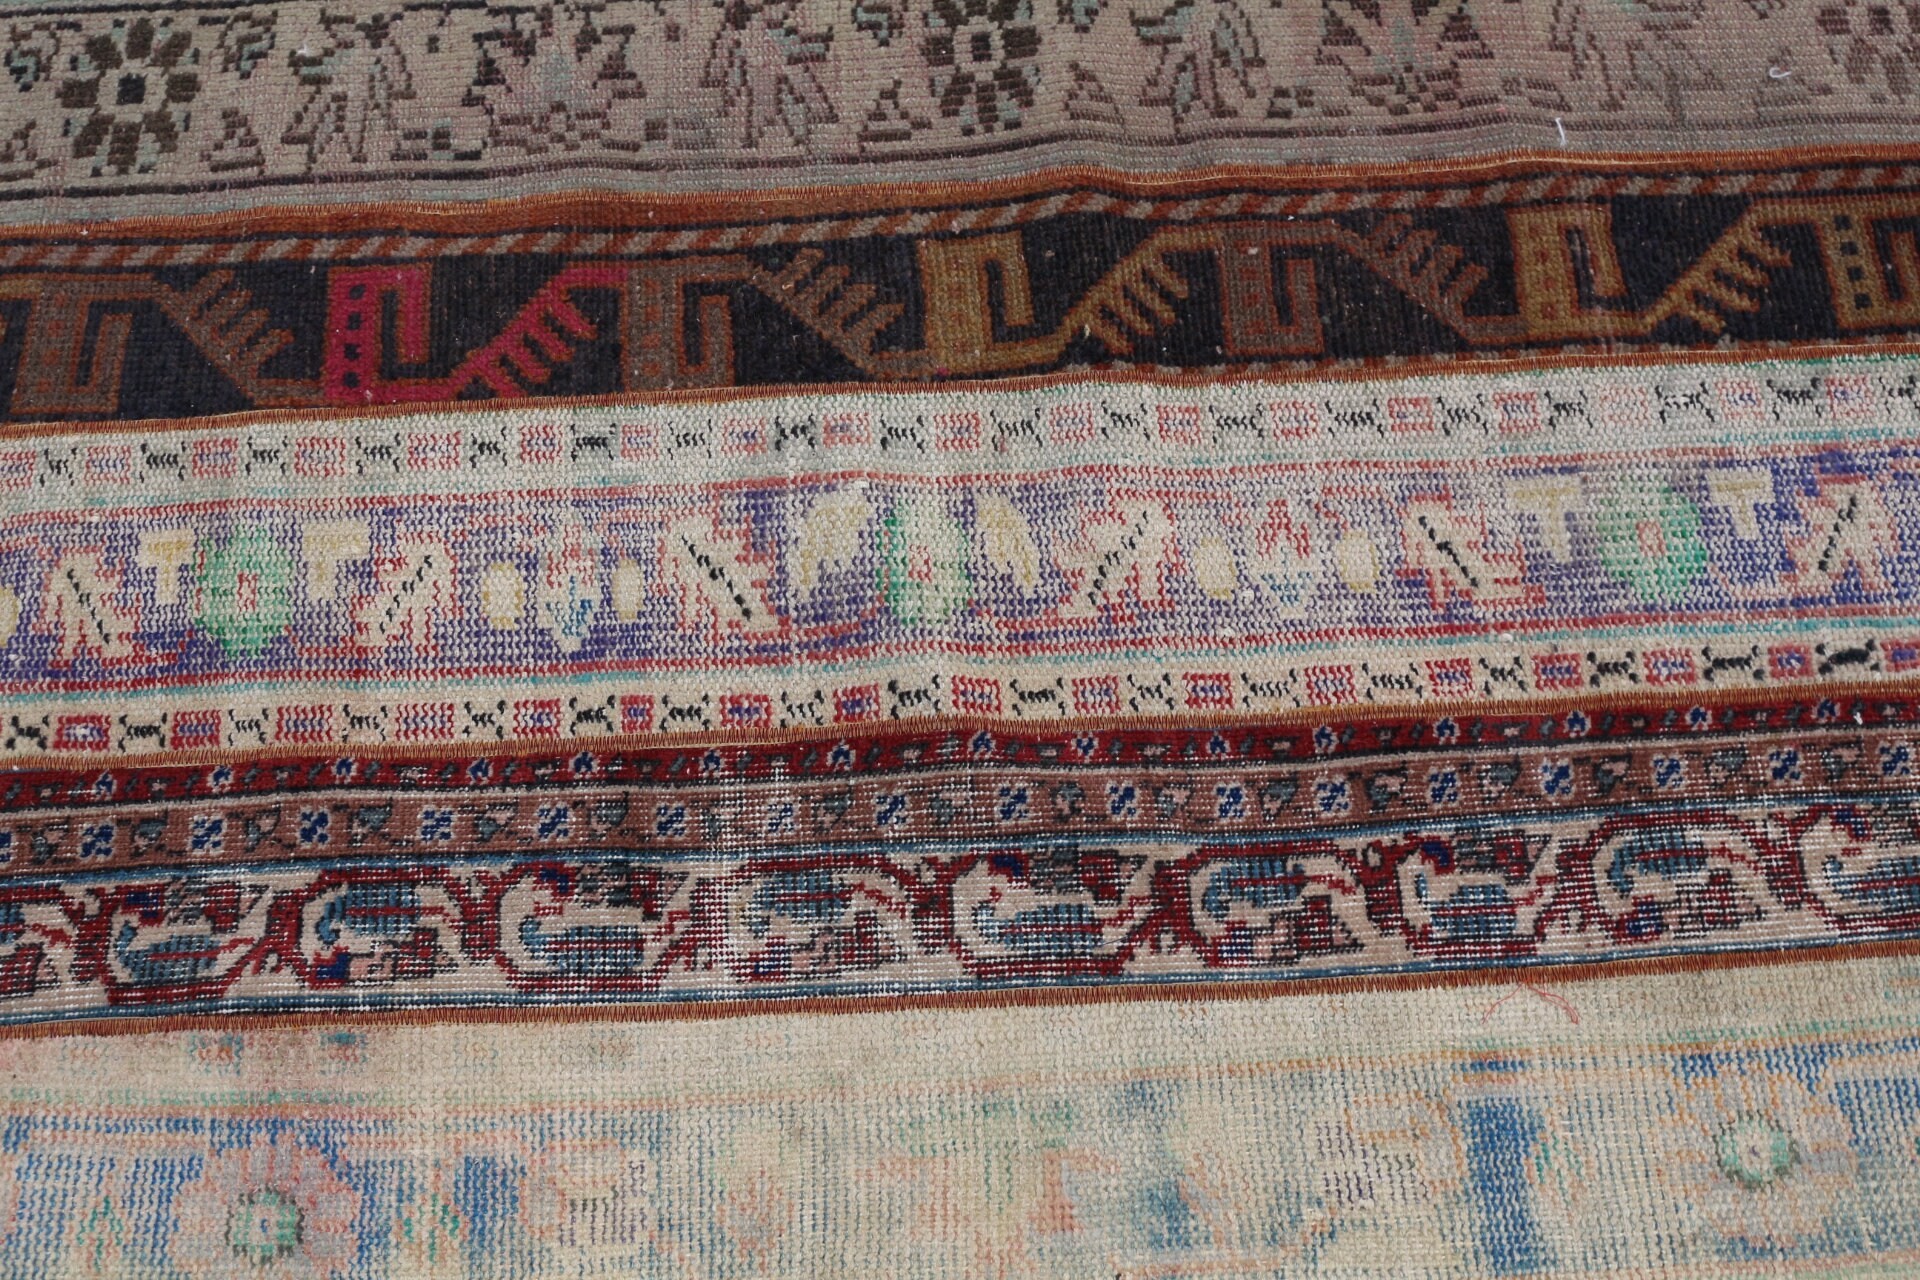 Rugs for Kitchen, 3.1x7.4 ft Accent Rugs, Anatolian Rug, Entry Rug, Kitchen Rugs, Rainbow Moroccan Rug, Vintage Rug, Old Rug, Turkish Rugs